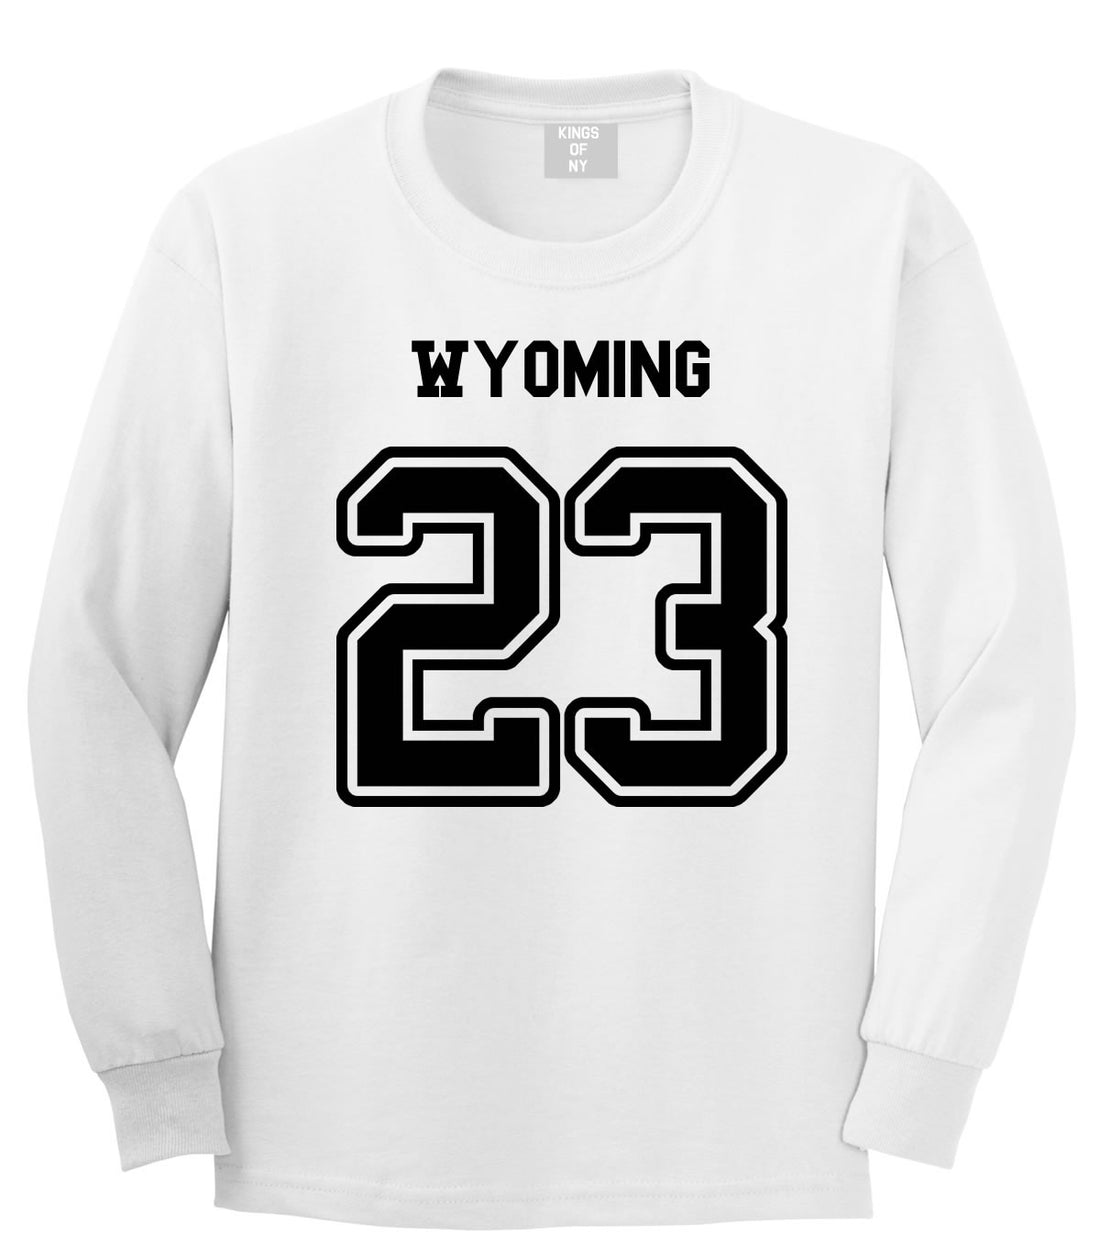 Sport Style Wyoming 23 Team State Jersey Long Sleeve T-Shirt By Kings Of NY